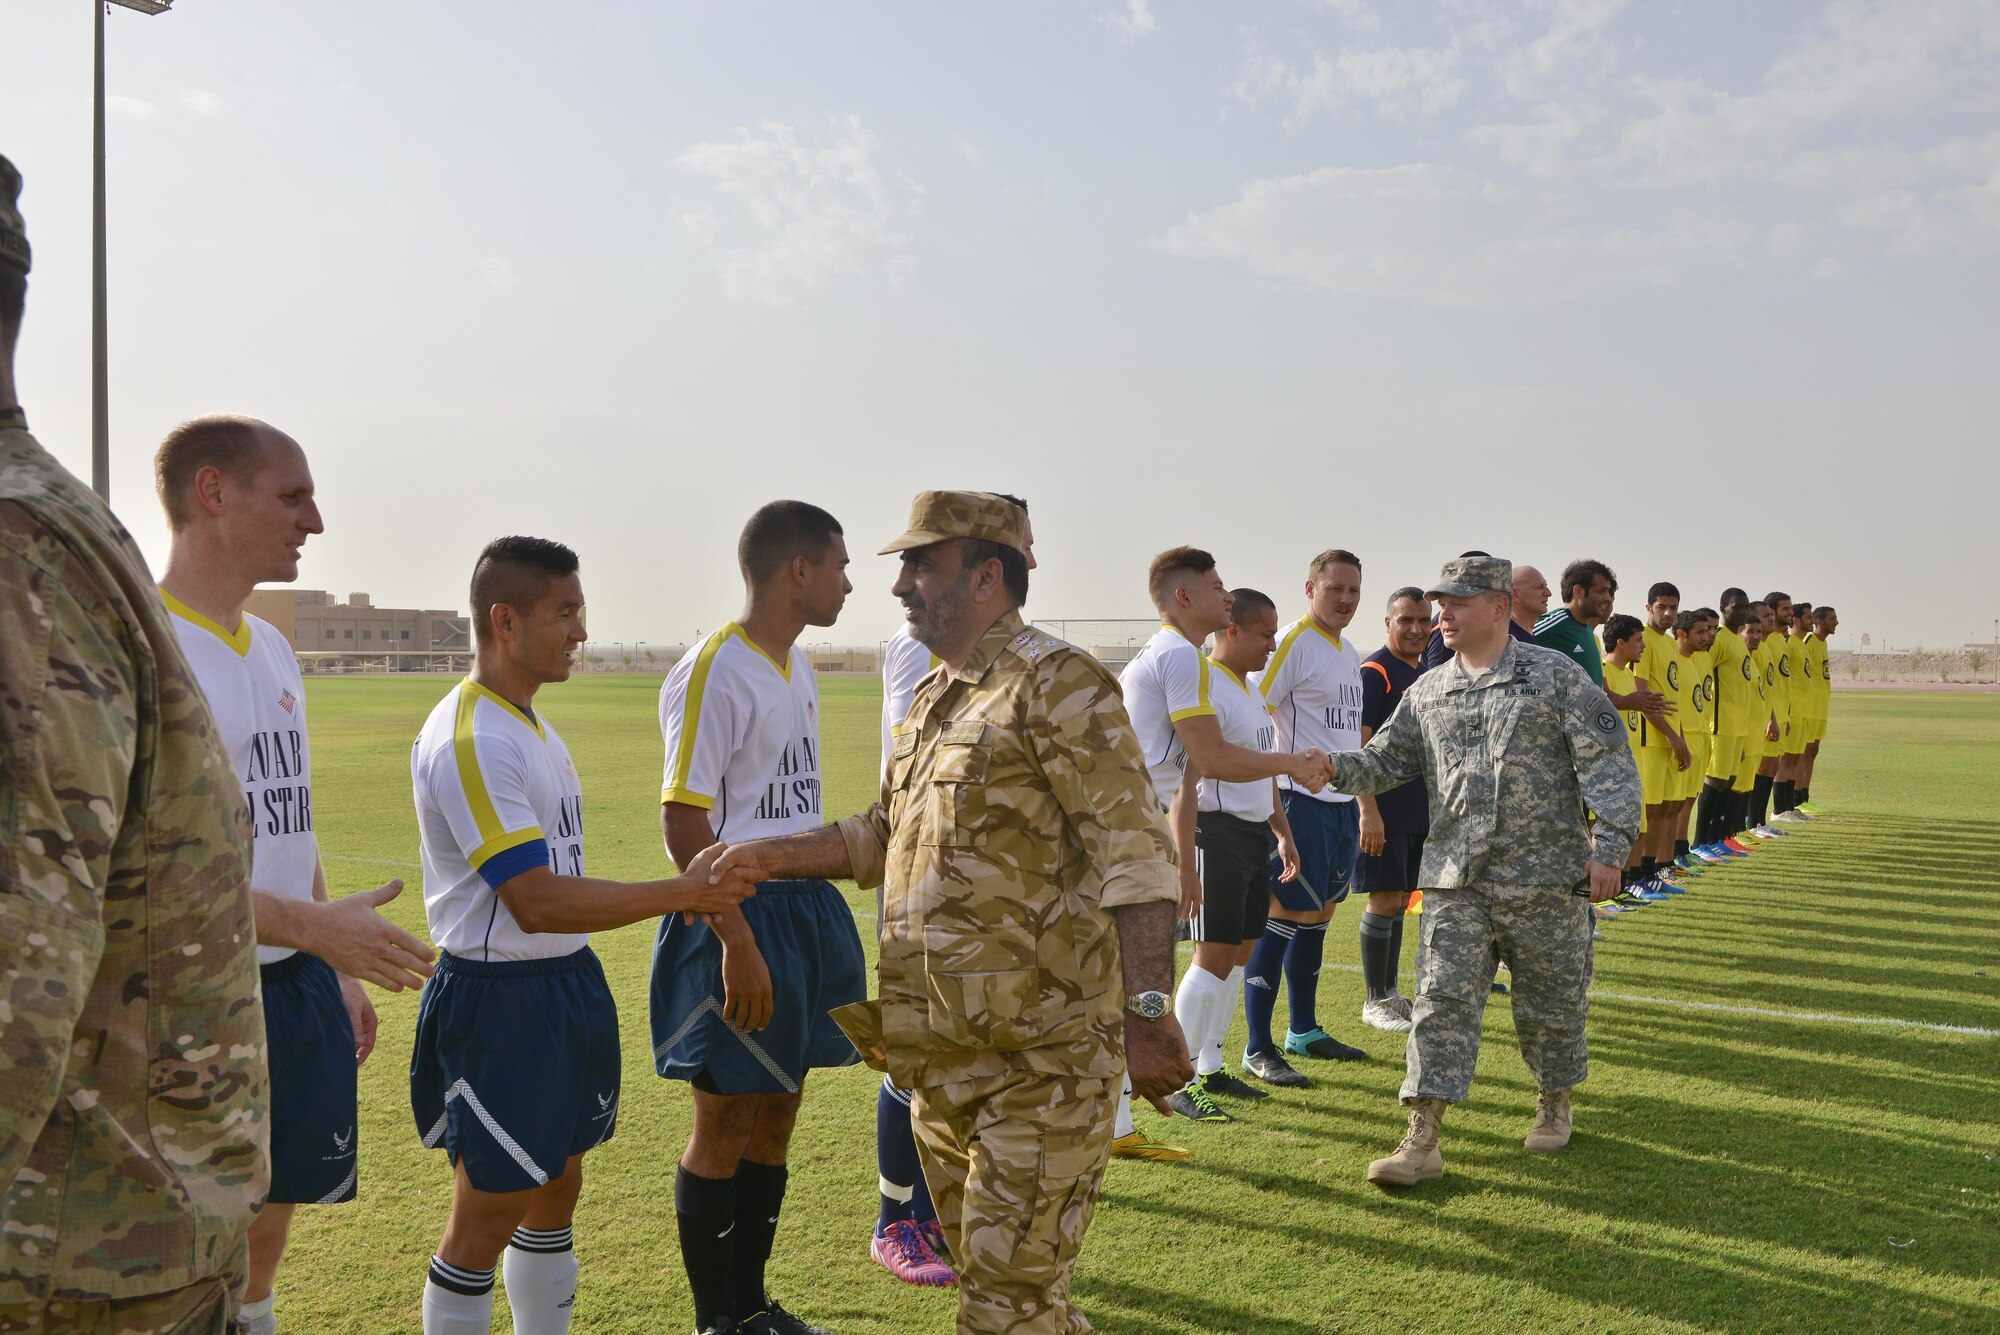 Qatari Brig. Gen. Fahad Al-Eraik, Al Udeid Air Base commander, and U.S. Army  Col. Jeff Merinkov, Camp As Sayliyah commander, shake hands and greet each player from both the Qatari and Al Udeid teams during the opening of soccer match in celebration of the 240th U.S.  Army birthday June 14, 25015 at Al Udeid Air Base, Qatar. AUAB All-Stars planned a soccer match to help strengthen the partnership between the U.S. and Qatari military and build friendships between service members. (U.S. Air Force photo/Staff Sgt. Alexandre Montes)